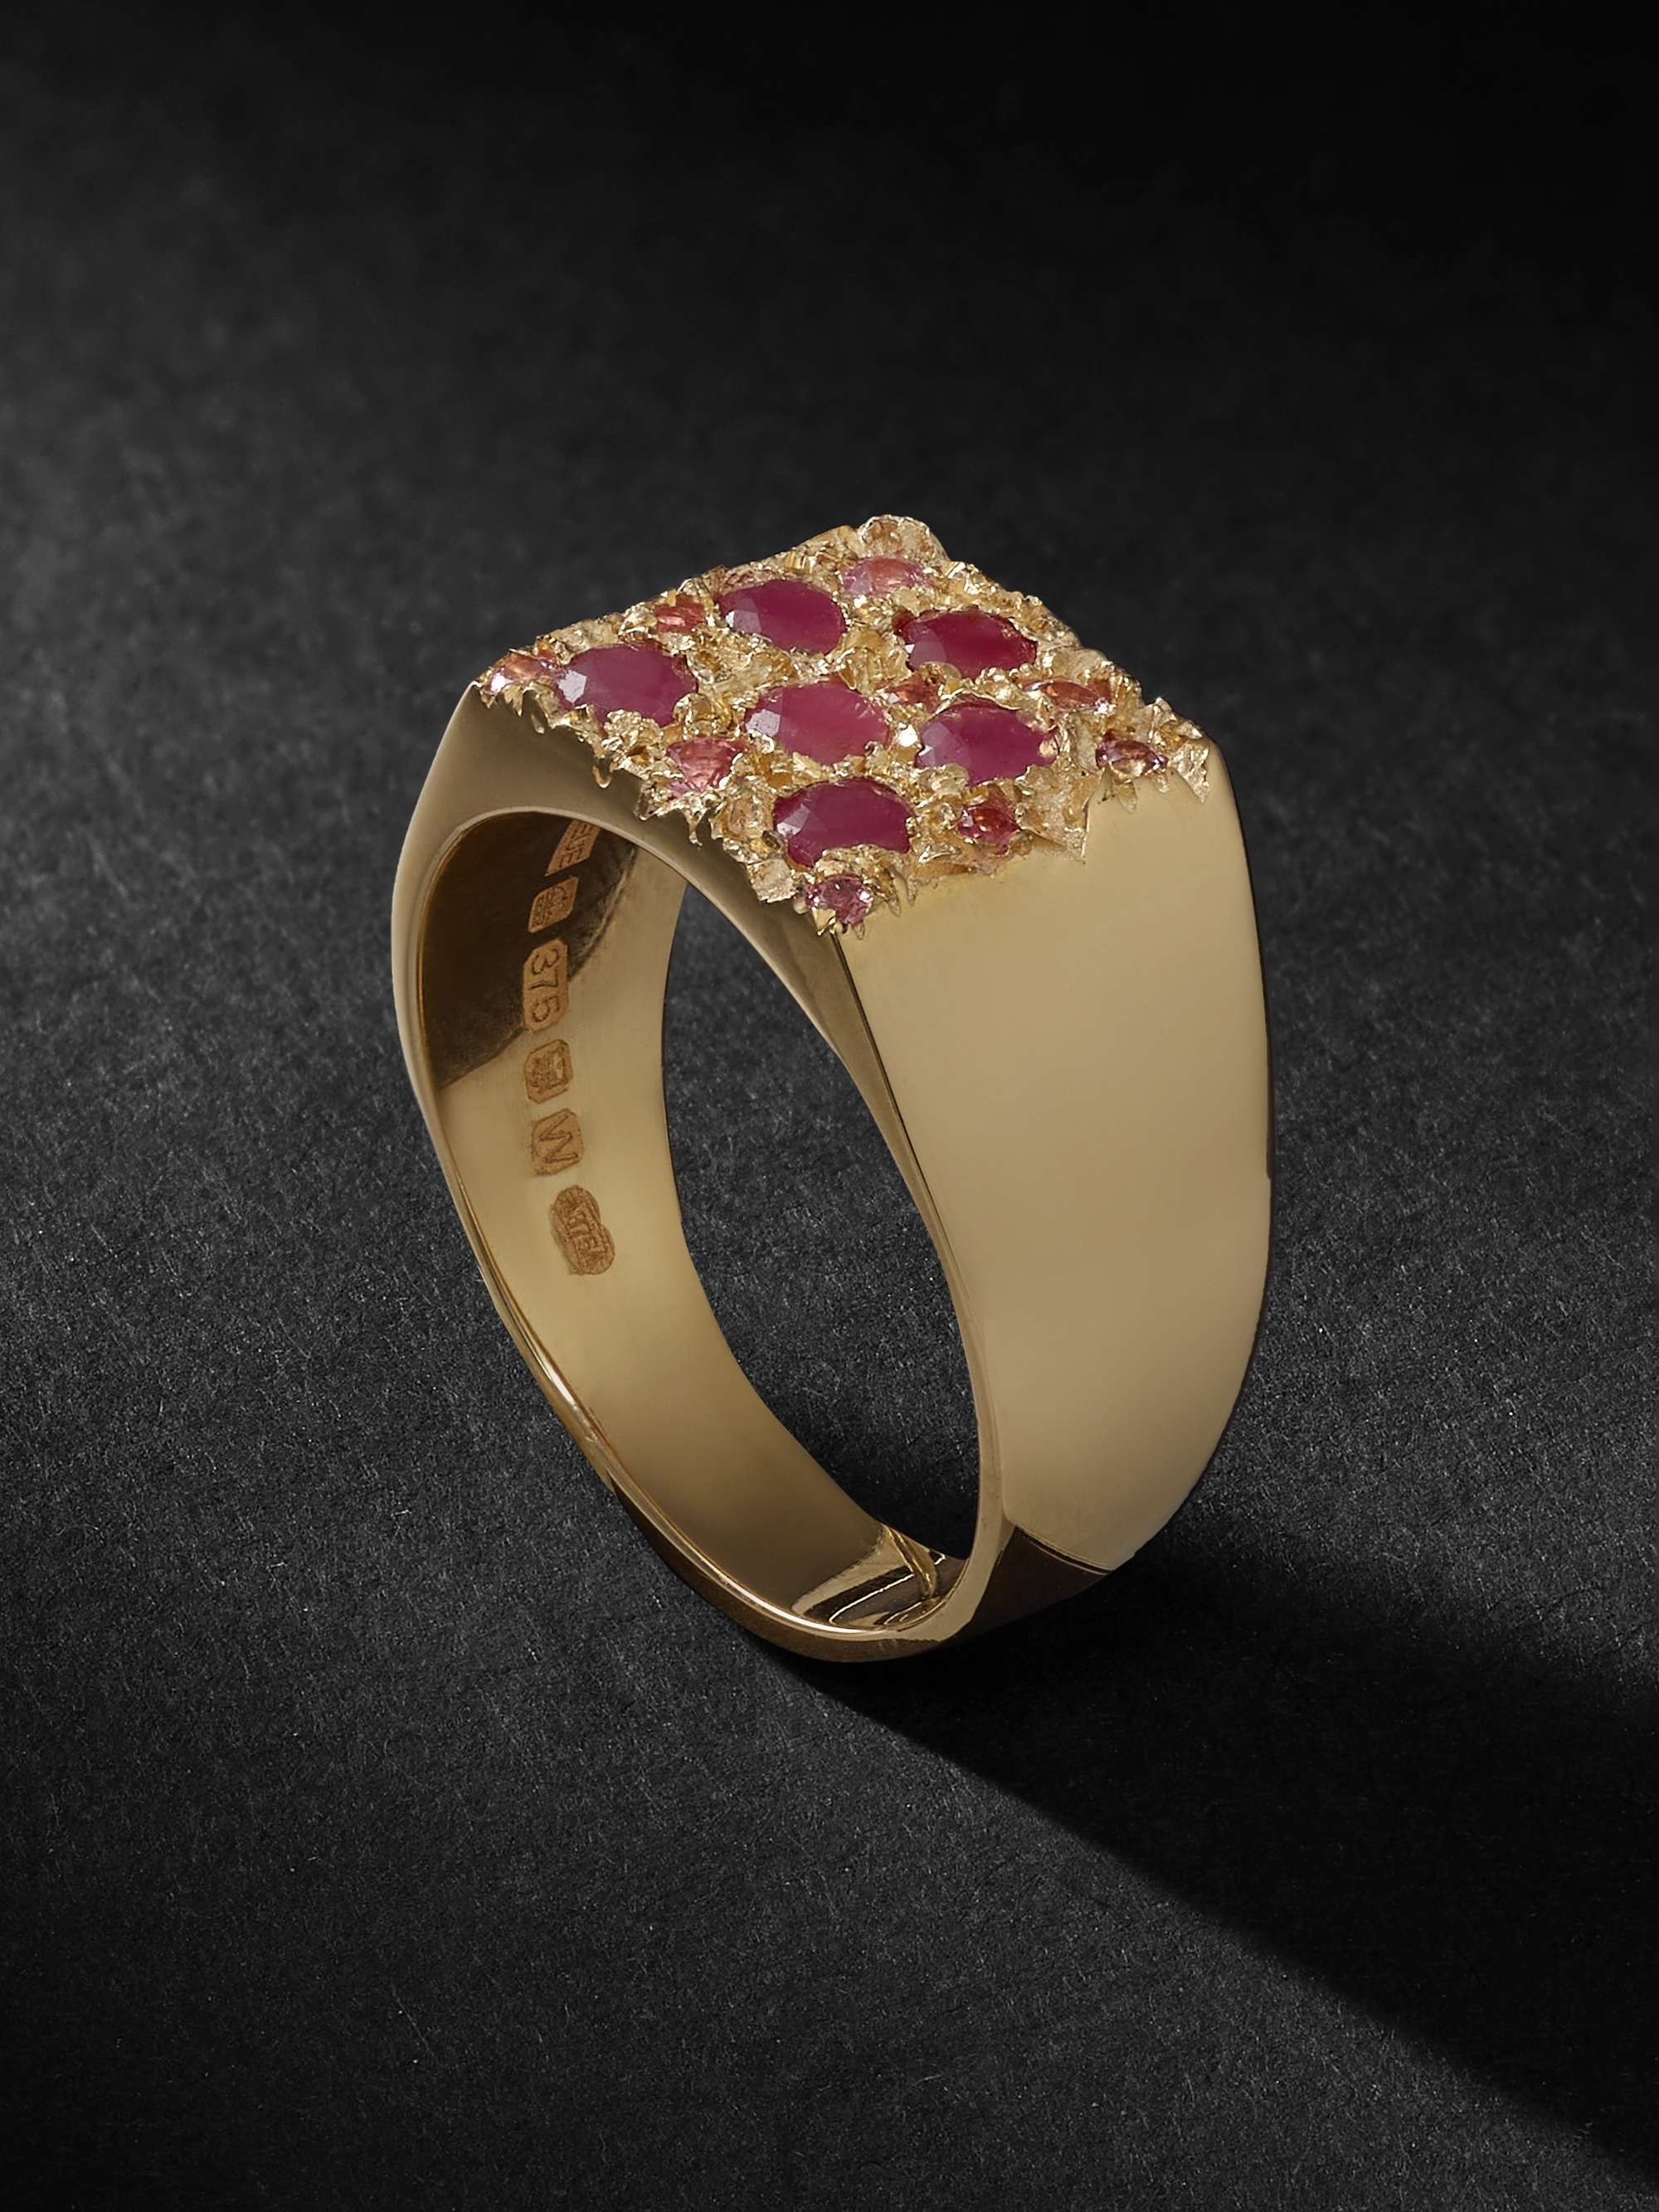 BLEUE BURNHAM Tuscany Superb Recycled 9-Karat Gold, Ruby and Sapphire Signet Ring